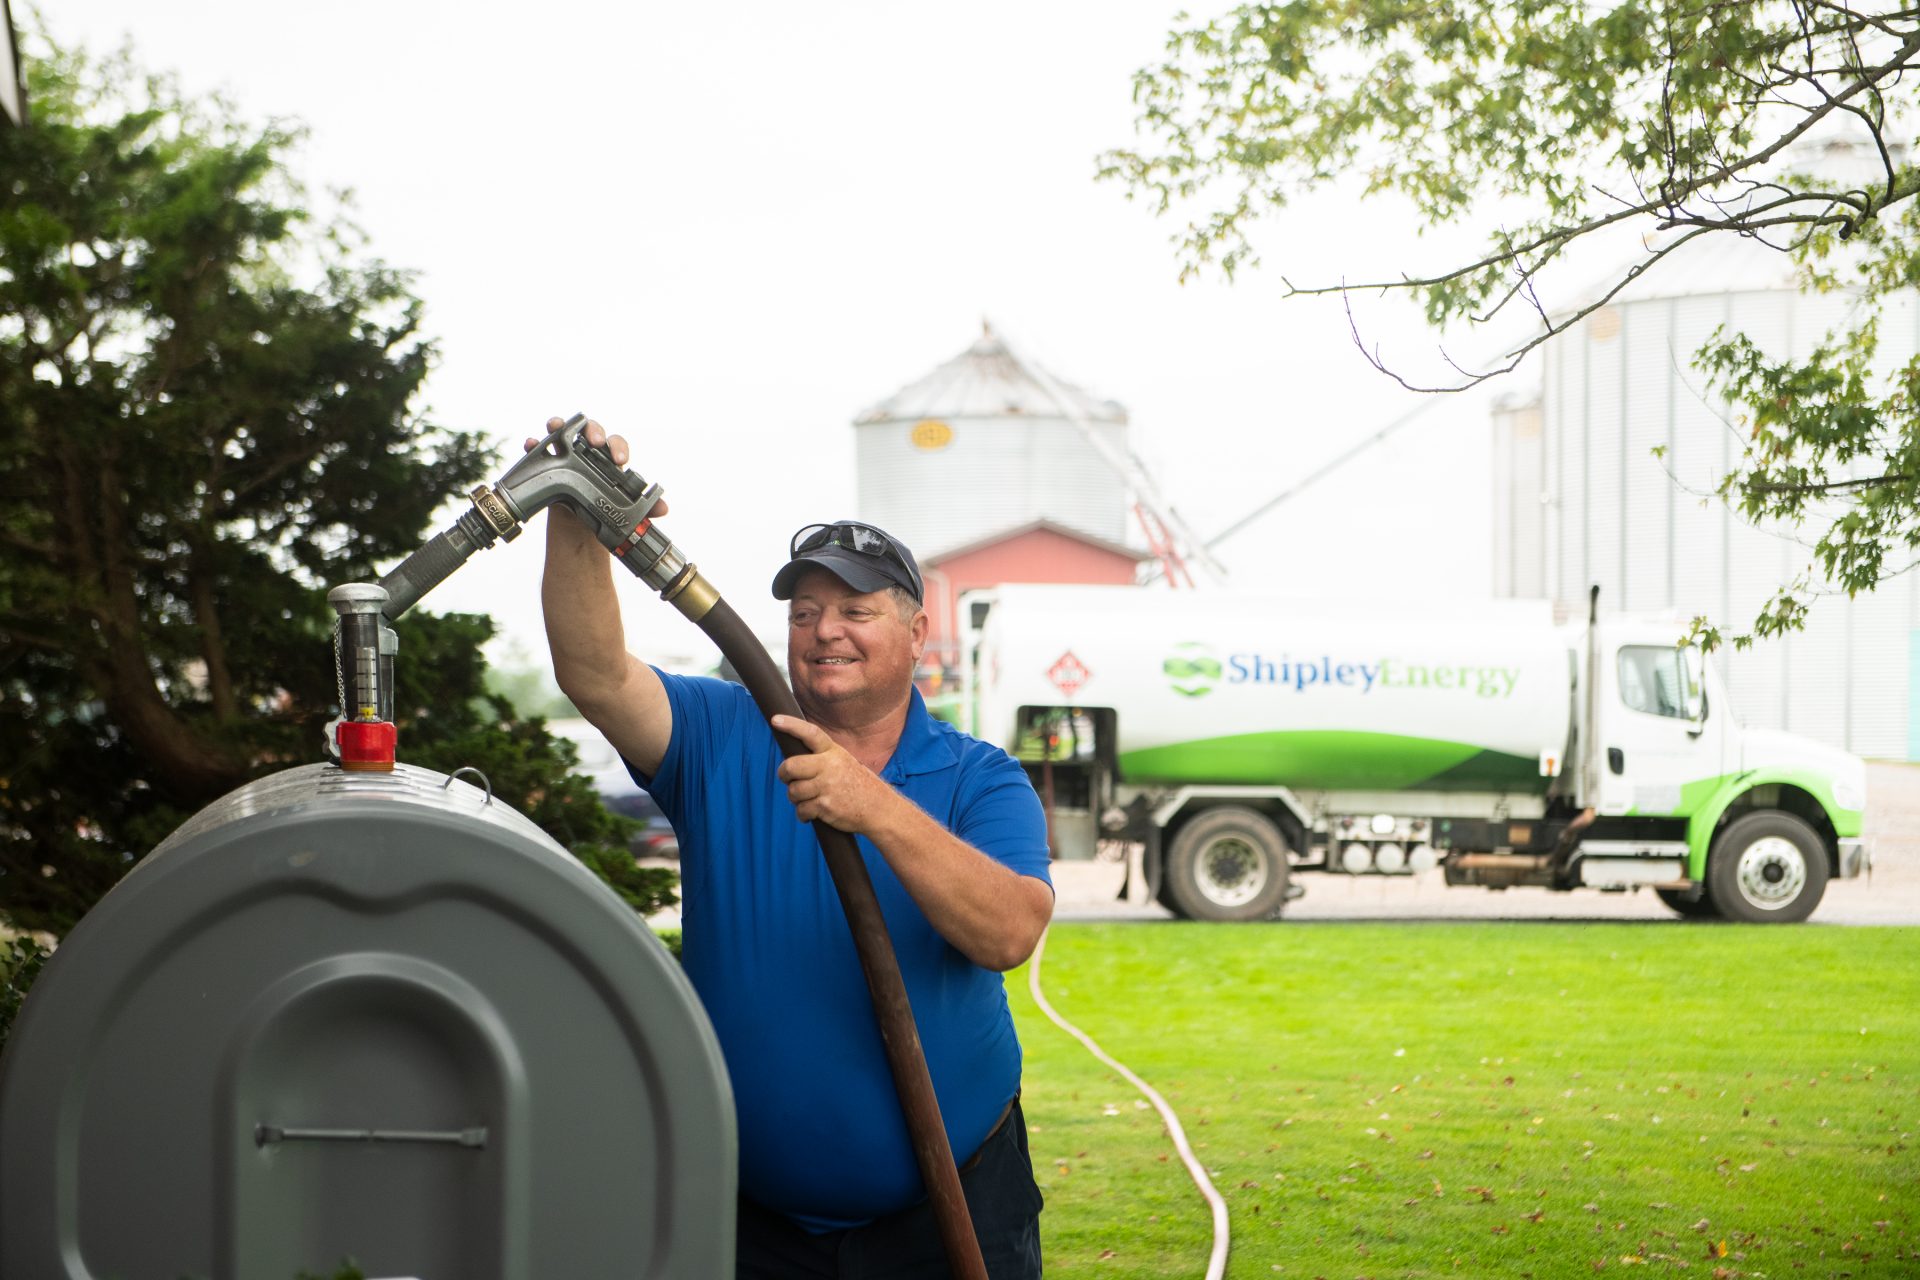 Shipley Energy heating oil delivery man smiling while filling a customer's tank.